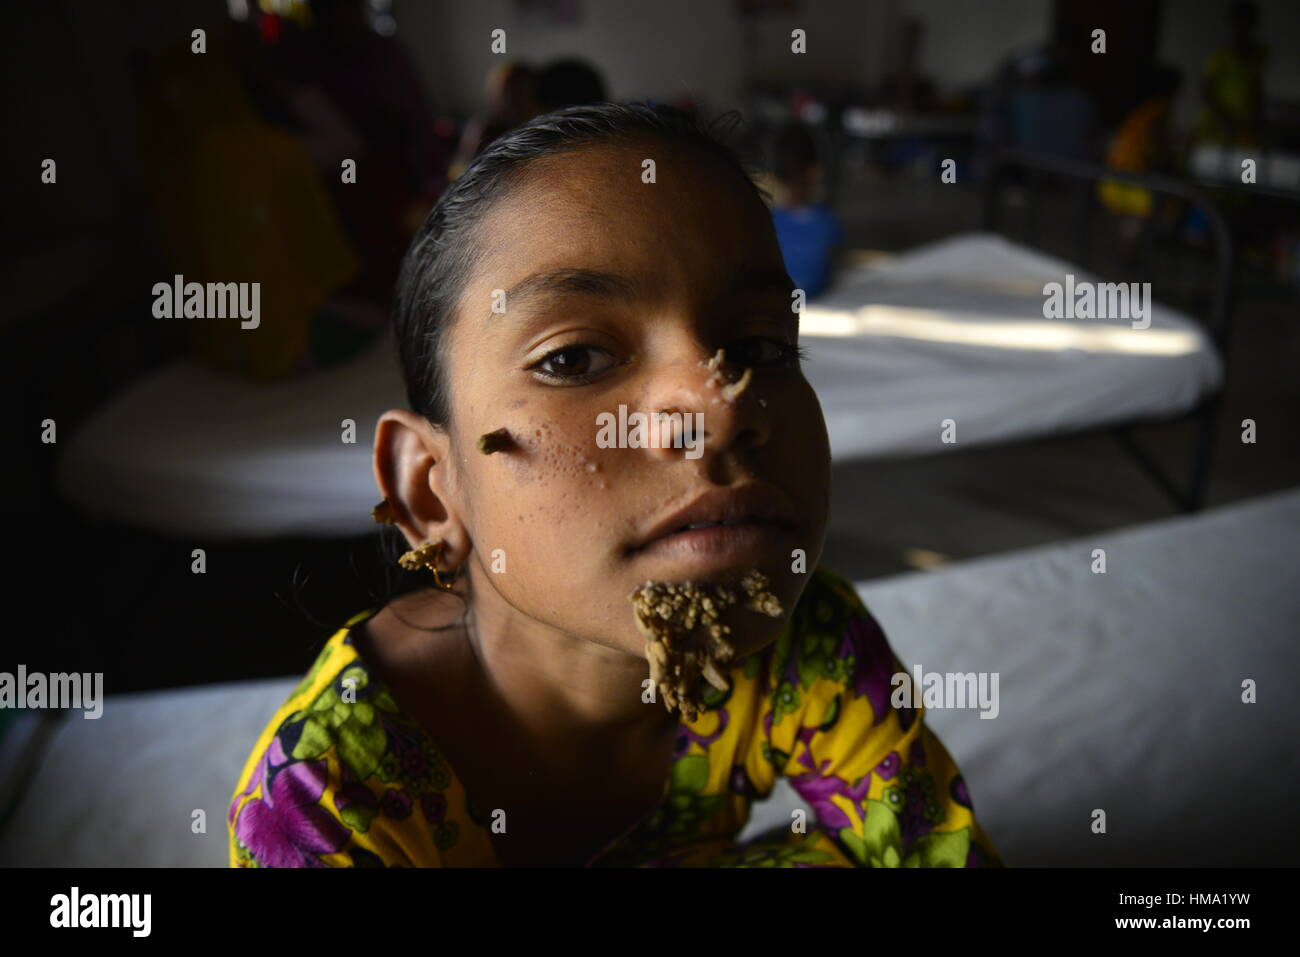 Bangladeshi patient Sahana Khatun, 10, poses for a photograph at the Dhaka Medical College and Hospital. On February 1, 2017 A young Bangladeshi girl with bark-like warts growing on her face could be the first female ever afflicted by so-called 'tree man syndrome', doctors studying the rare condition said January 31. Ten-year-old Sahana Khatun has the tell-tale gnarled growths sprouting from her chin, ear and nose, but doctors at Dhaka's Medical College Hospital are still conducting tests to establish if she has the unusual skin disorder. Stock Photo